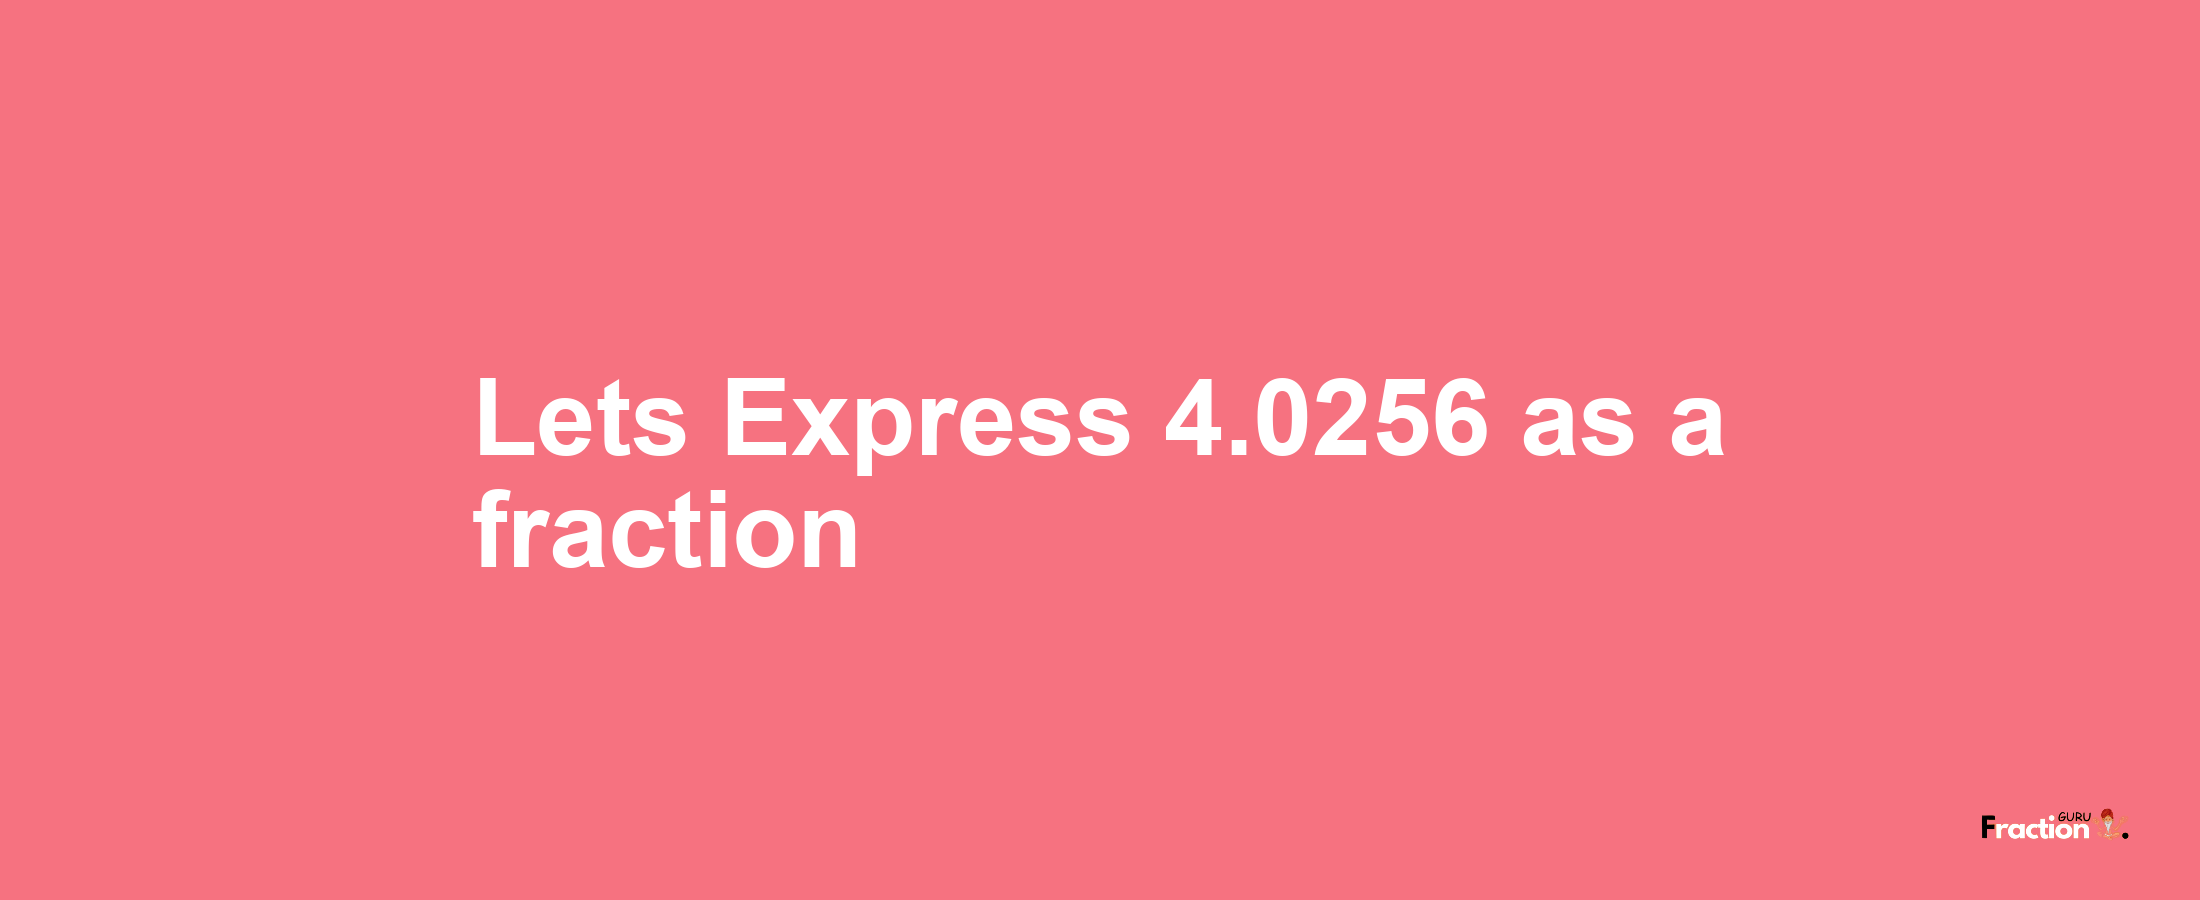 Lets Express 4.0256 as afraction